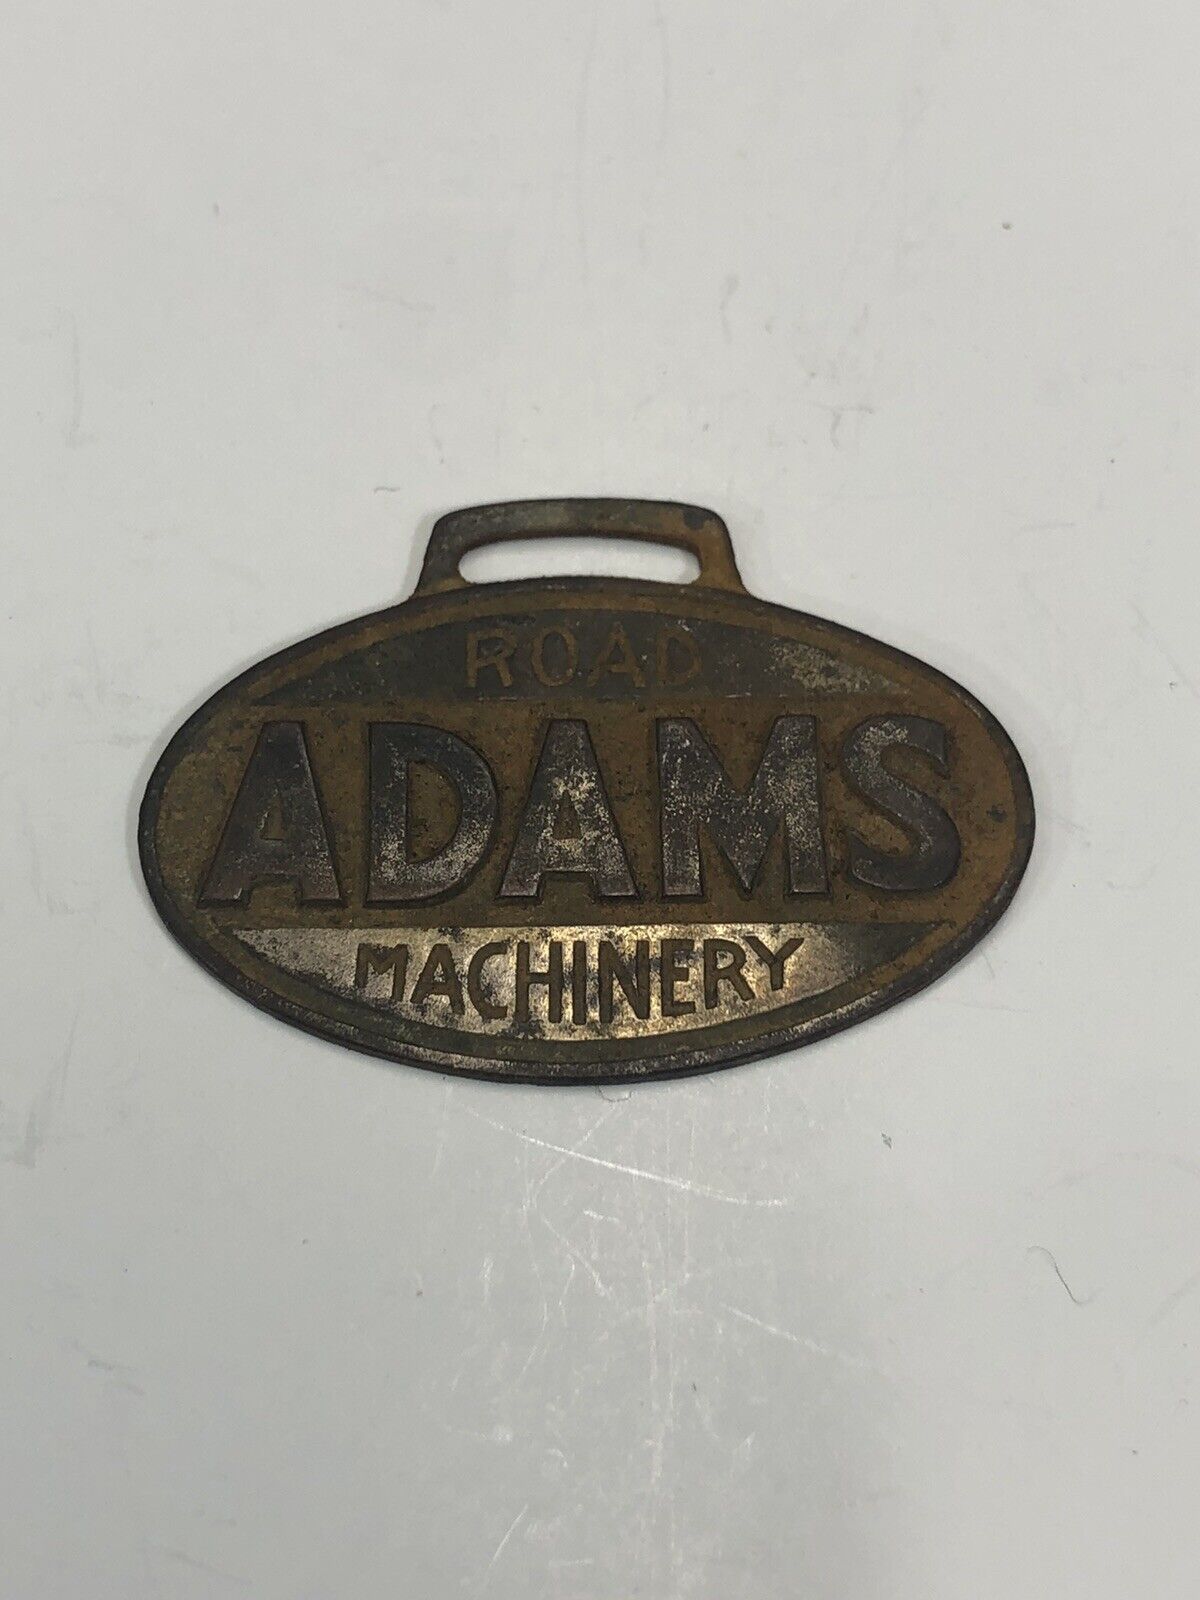 Vintage ADAMS ROAD MACHINERY Watch Fob Indianapolis,IND. (F2)